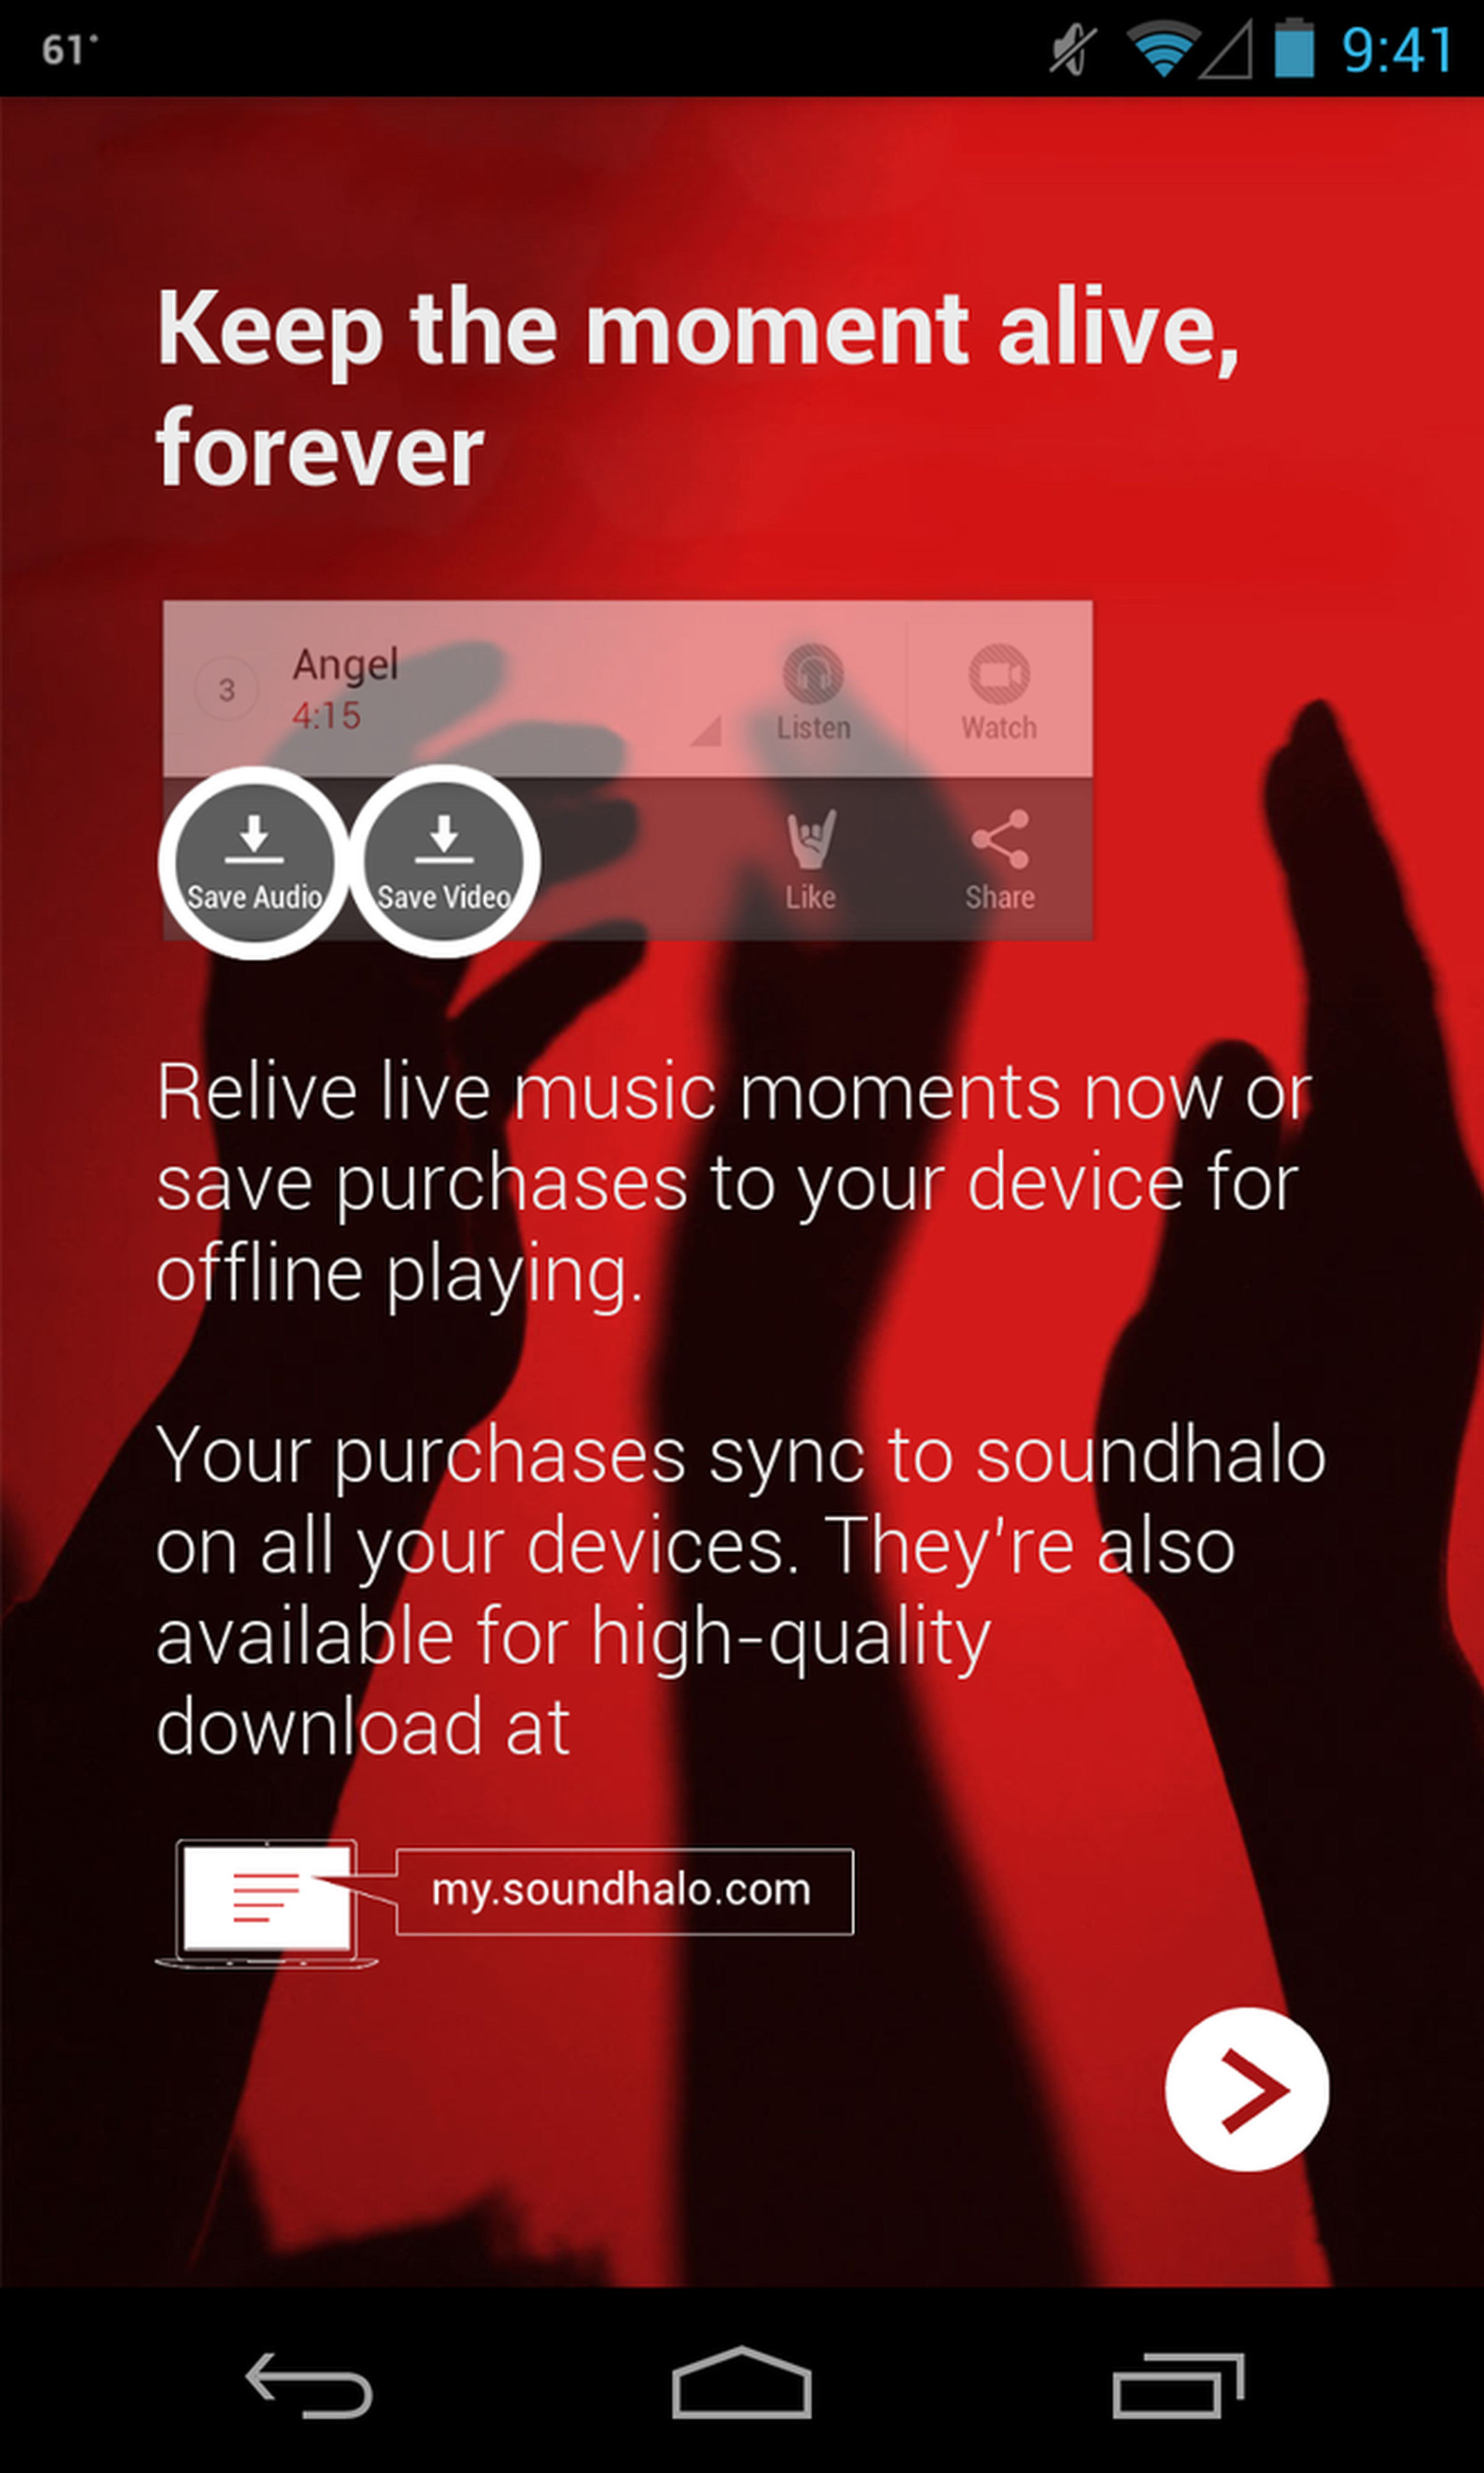 Soundhalo for Android screenshots